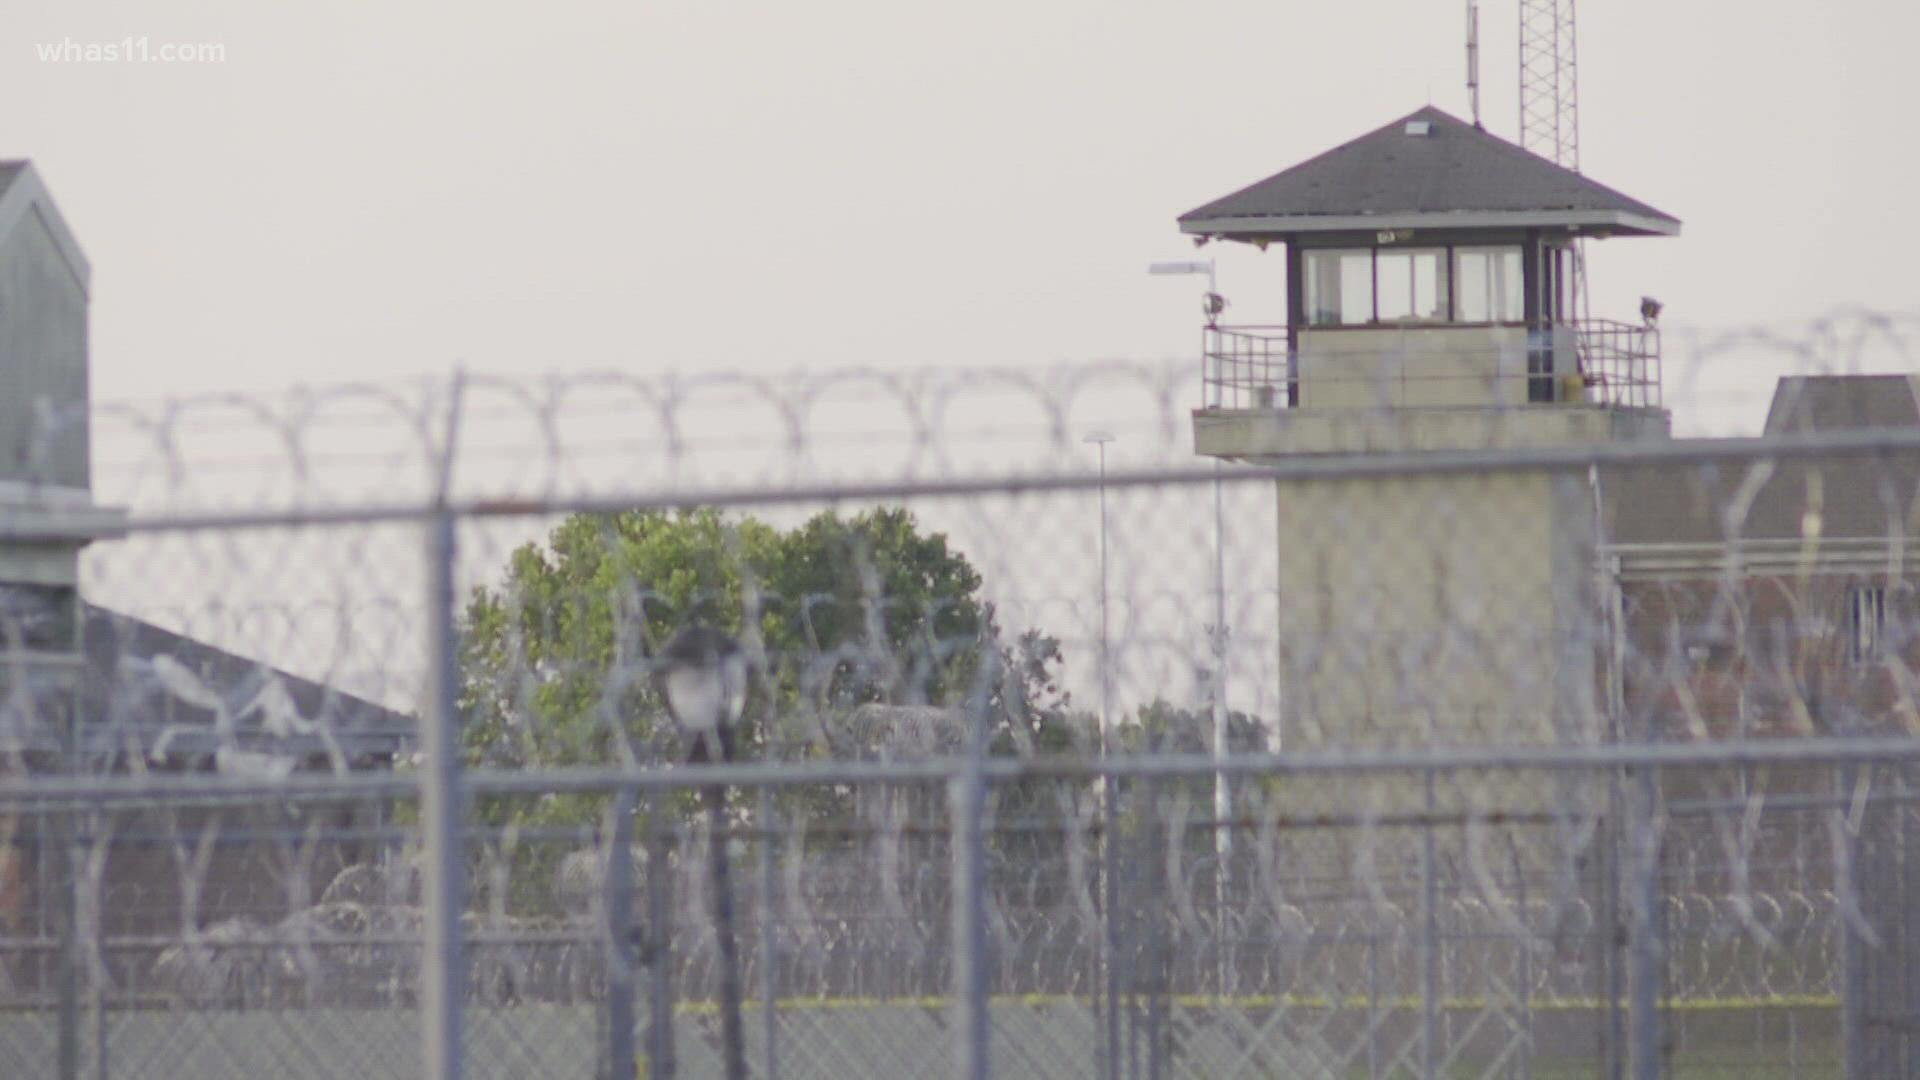 Family members are concerned for loved ones in the Kentucky Correctional Institution for Women, which has been without power for five days.